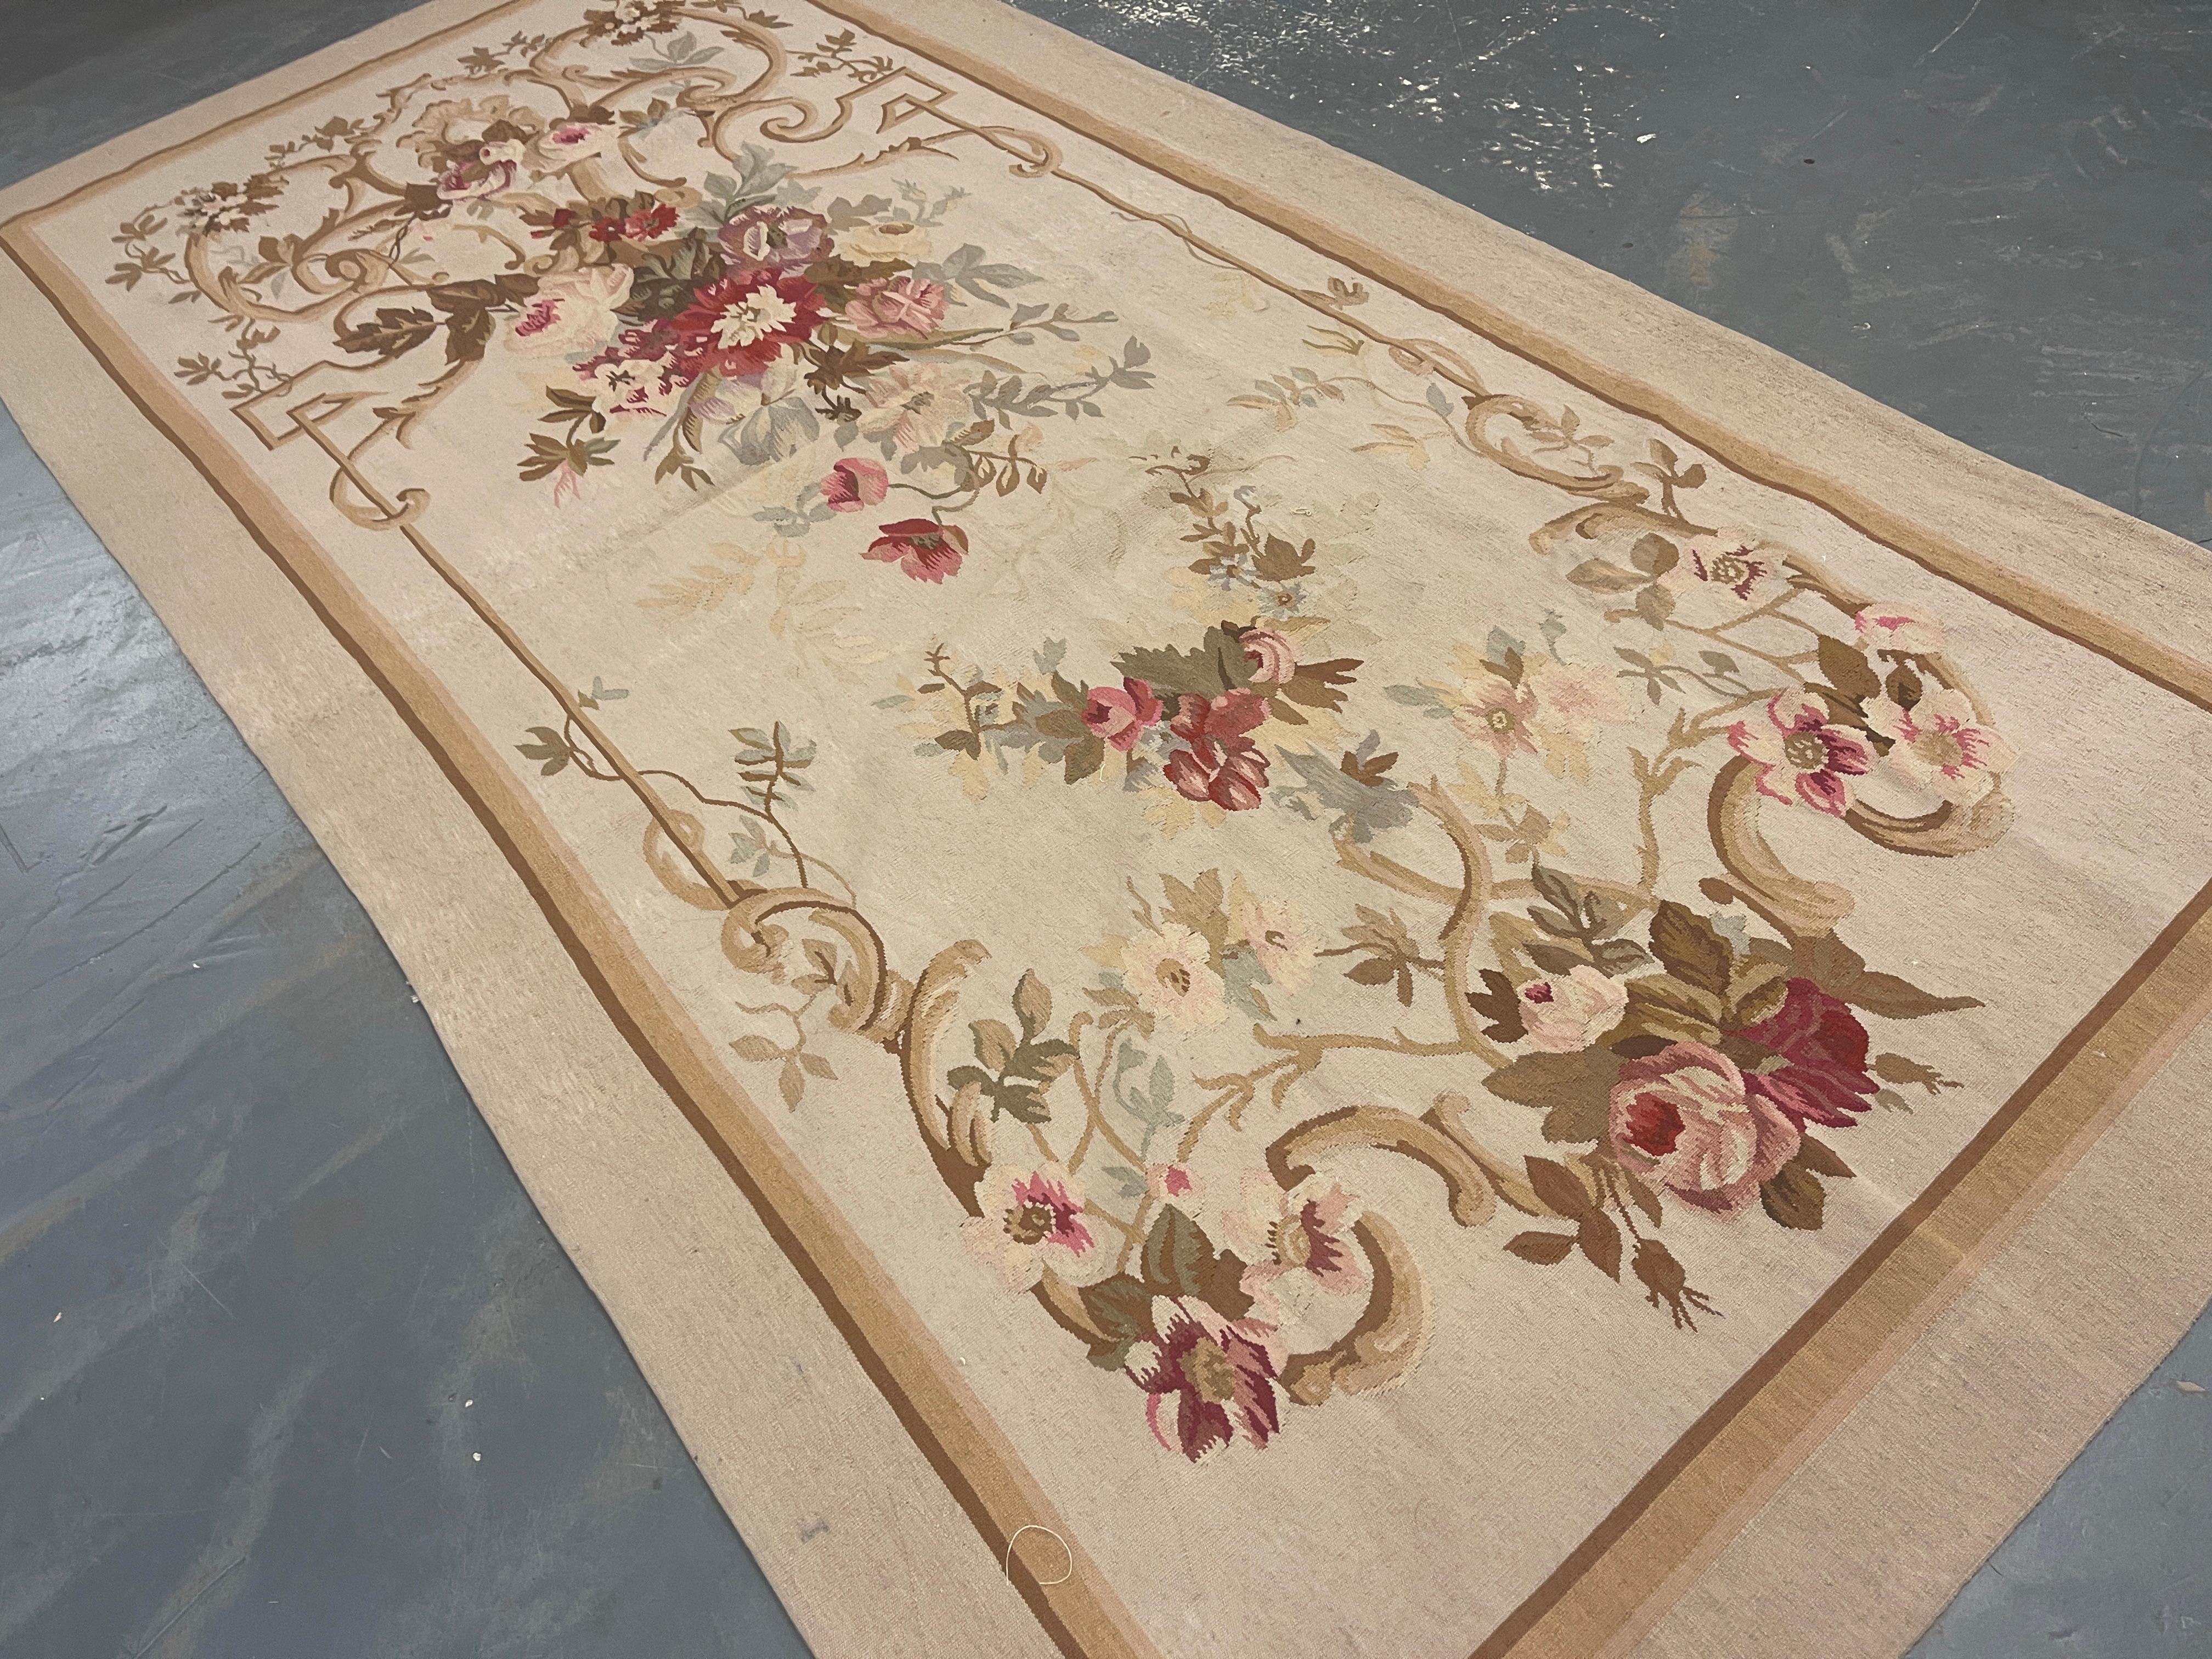 This fantastic area rug has been handwoven with a beautiful symmetrical floral design woven on an ivory beige background with cream green and ivory accents. This elegant piece's colour and design make it the perfect accent rug.
This style of rugs is